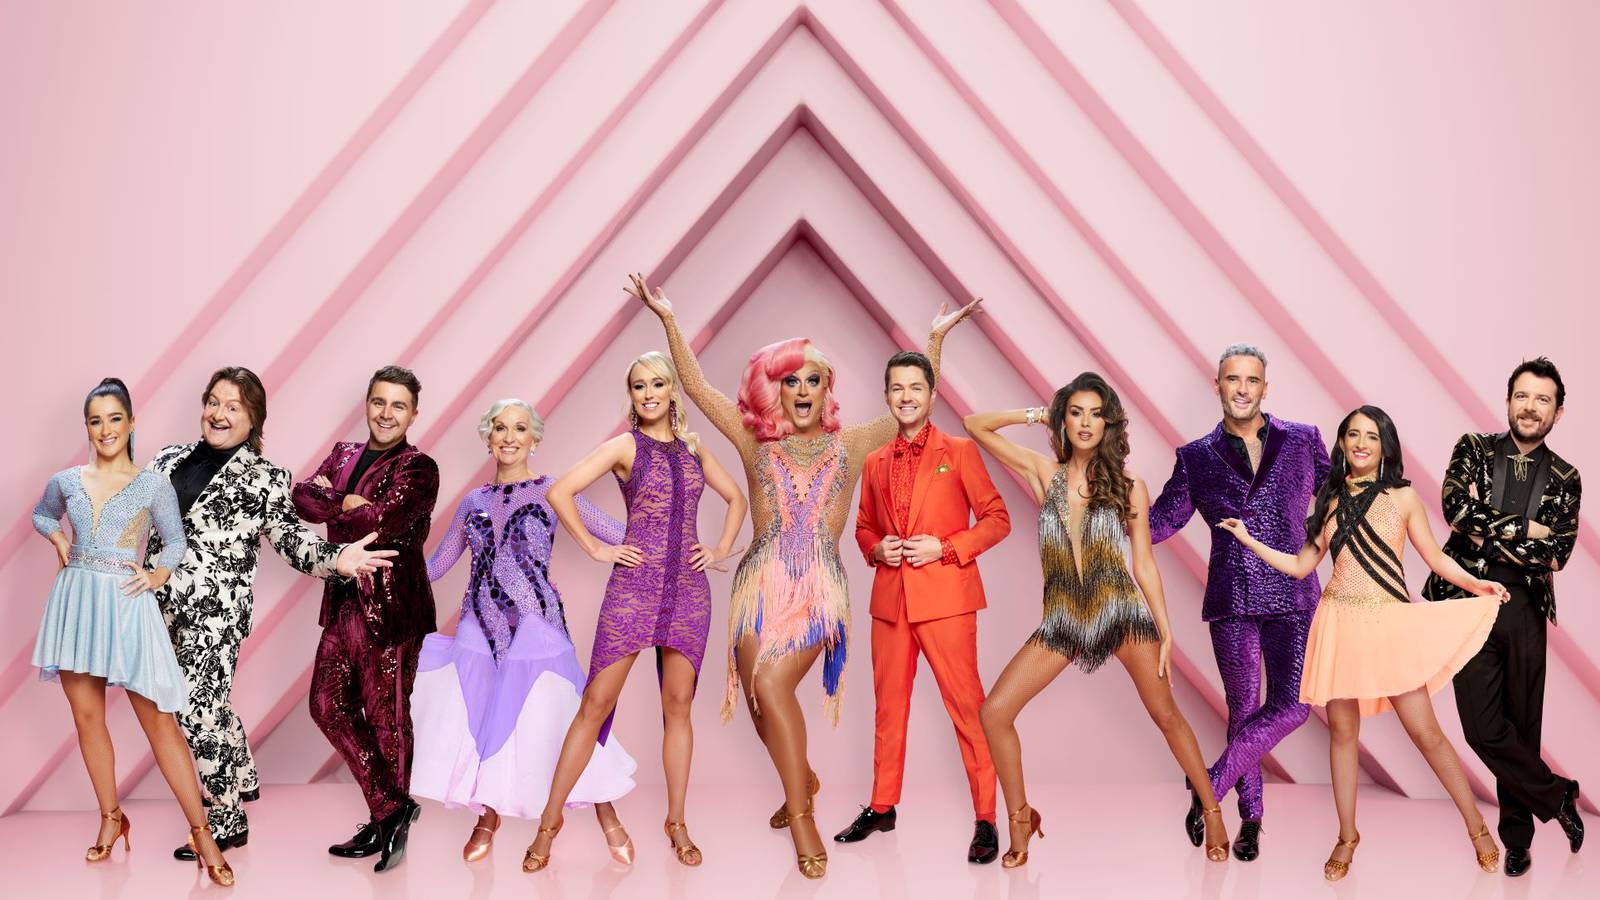 dancing with the stars tour 2023 schedule